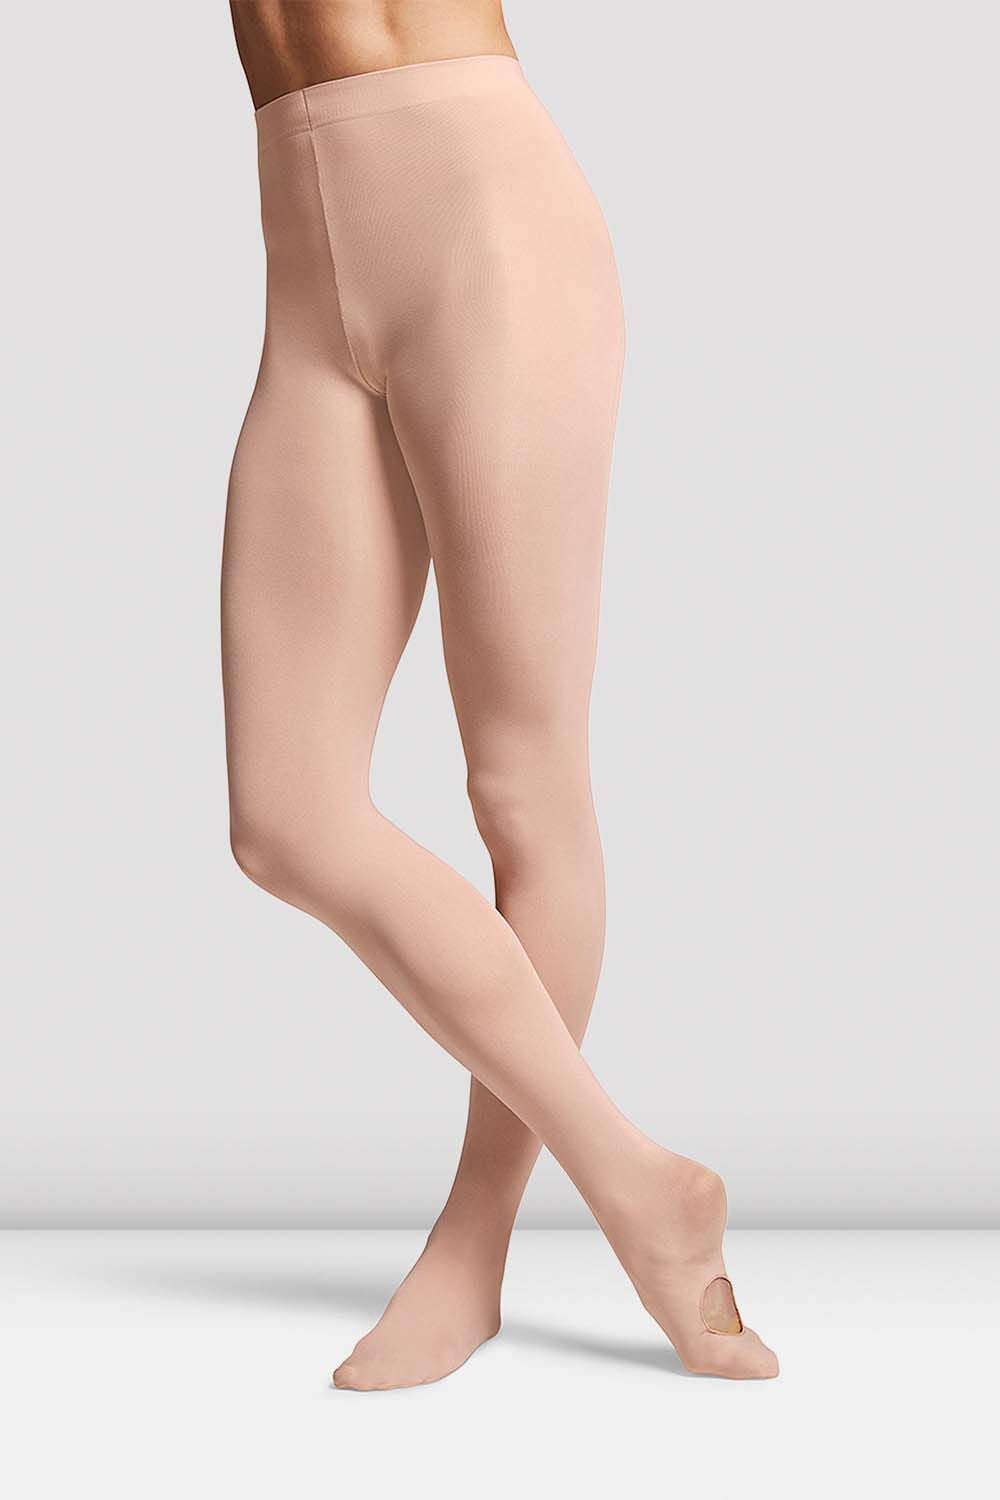 Move Dance Convertible Ballet Tights - Pink - Move Dance